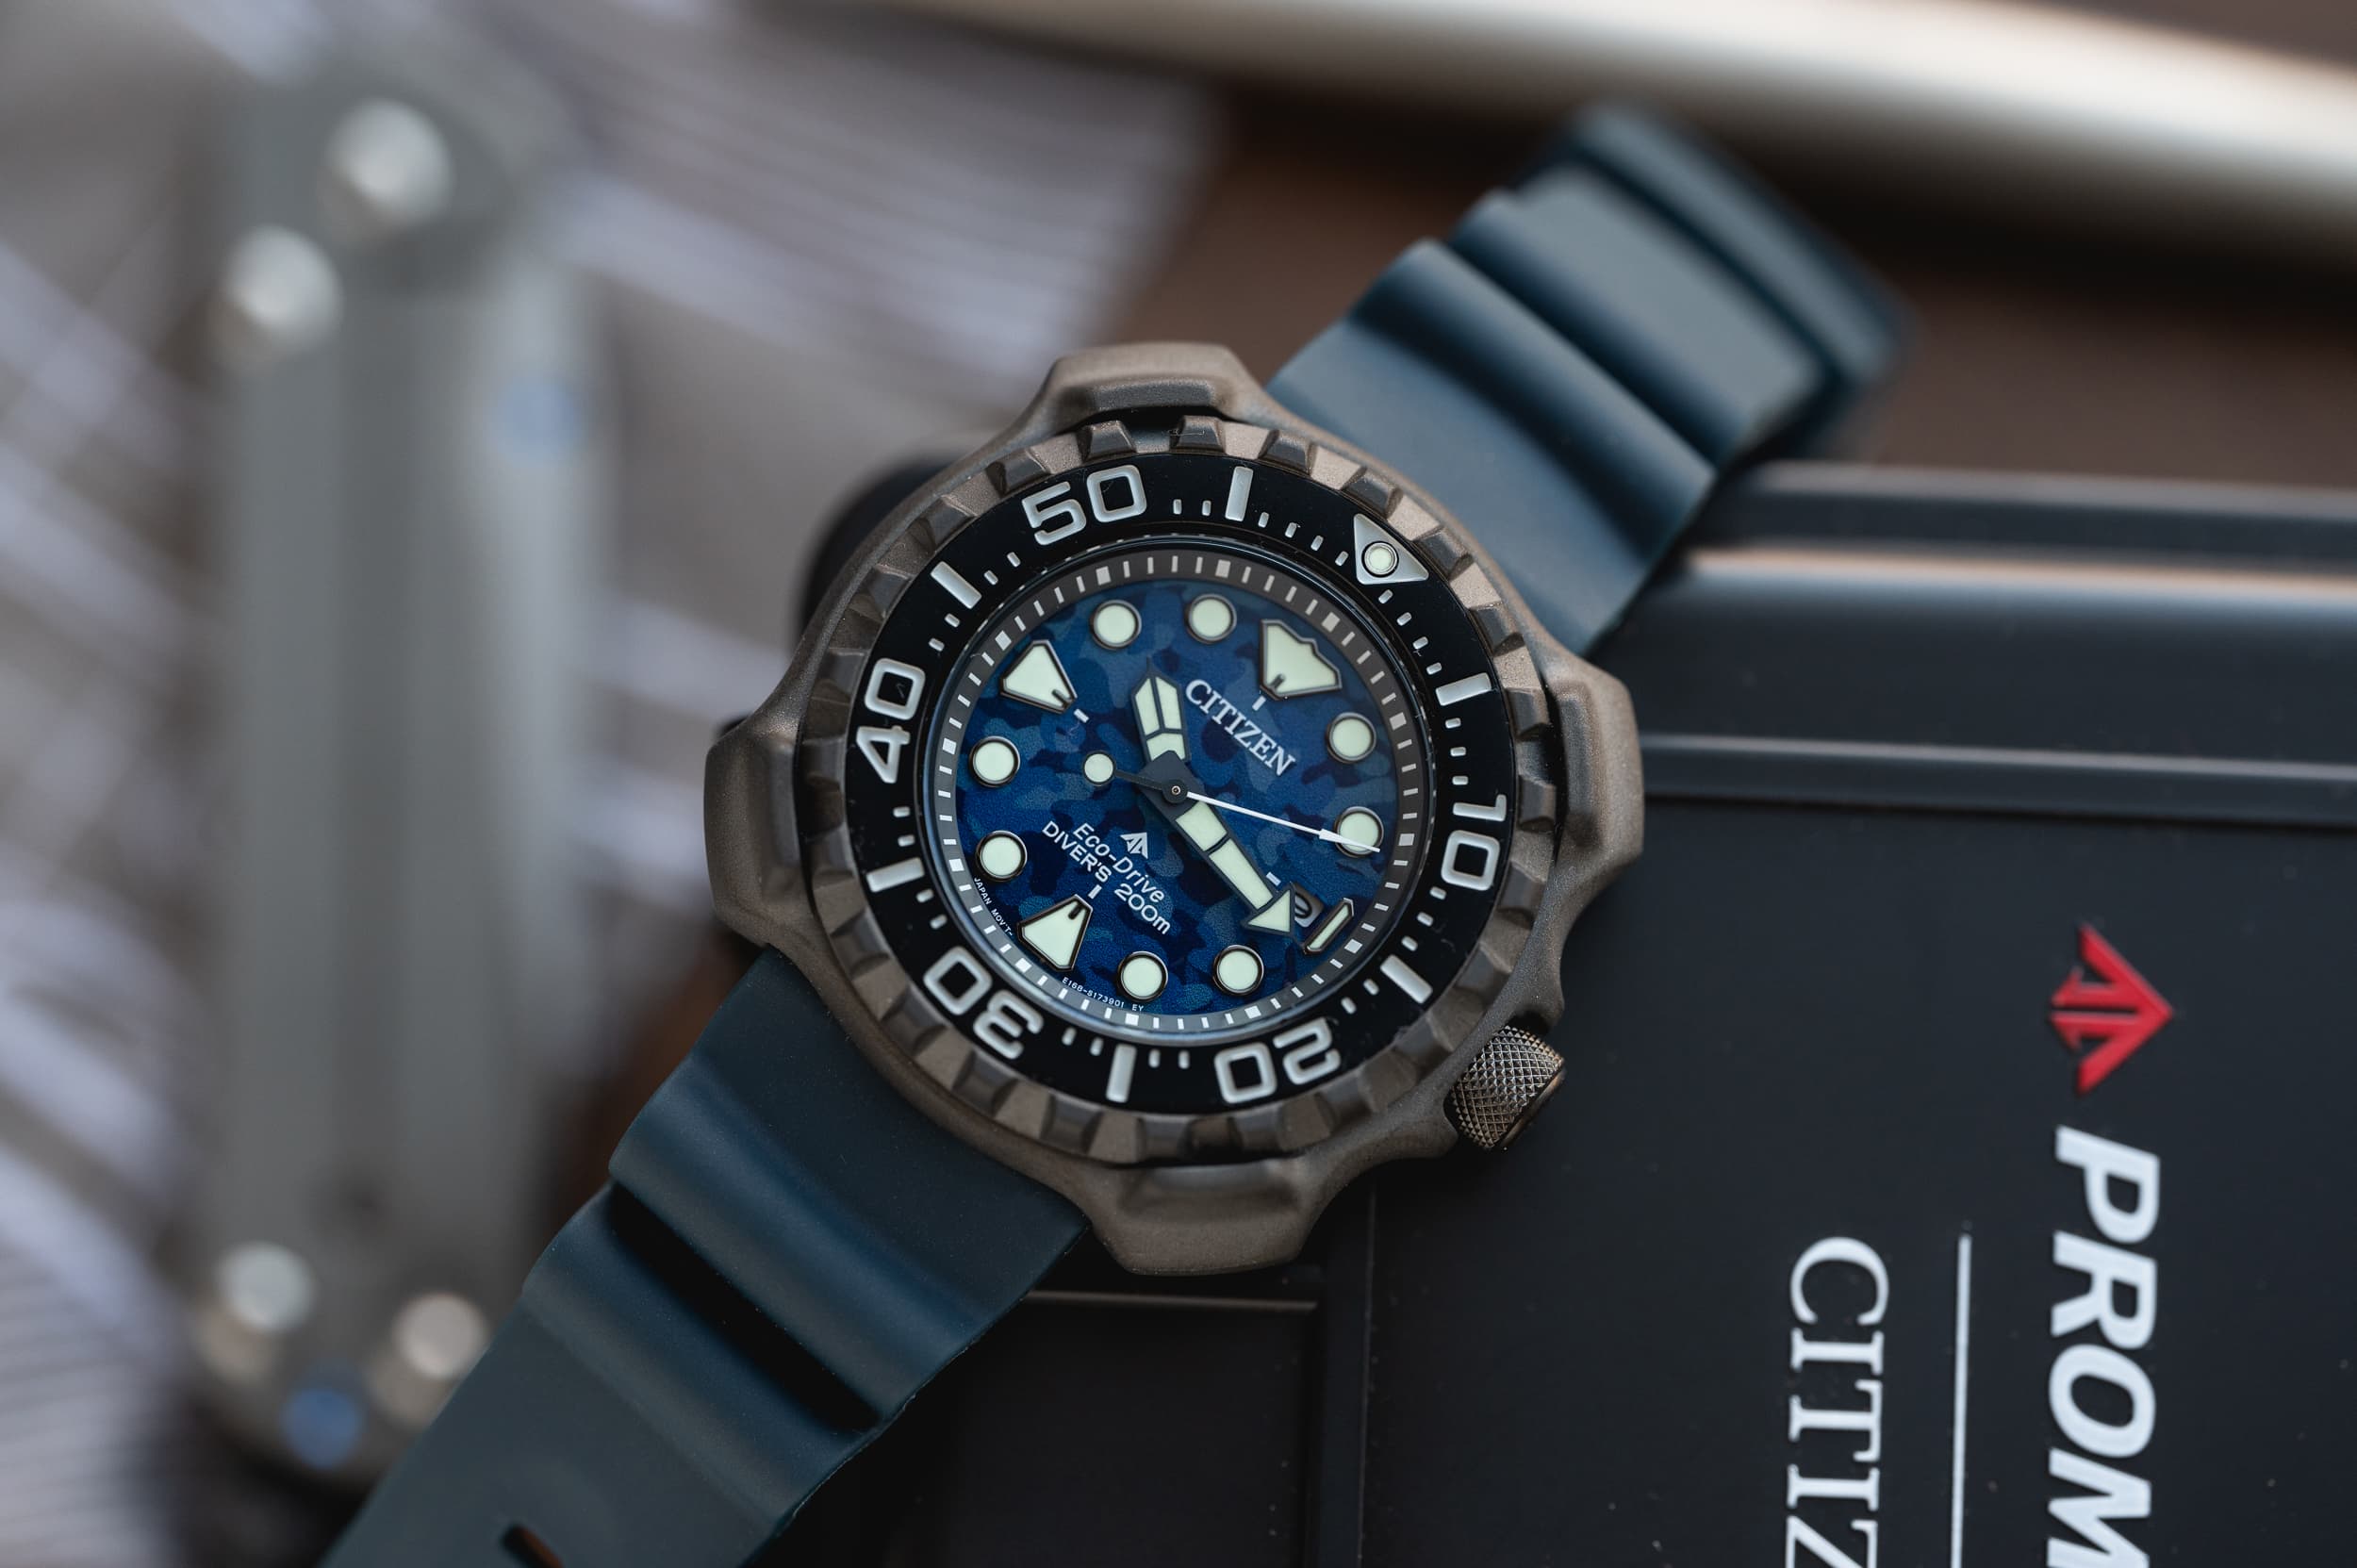 Owner's Reflections On The Wild Citizen Promaster Dive BN0227